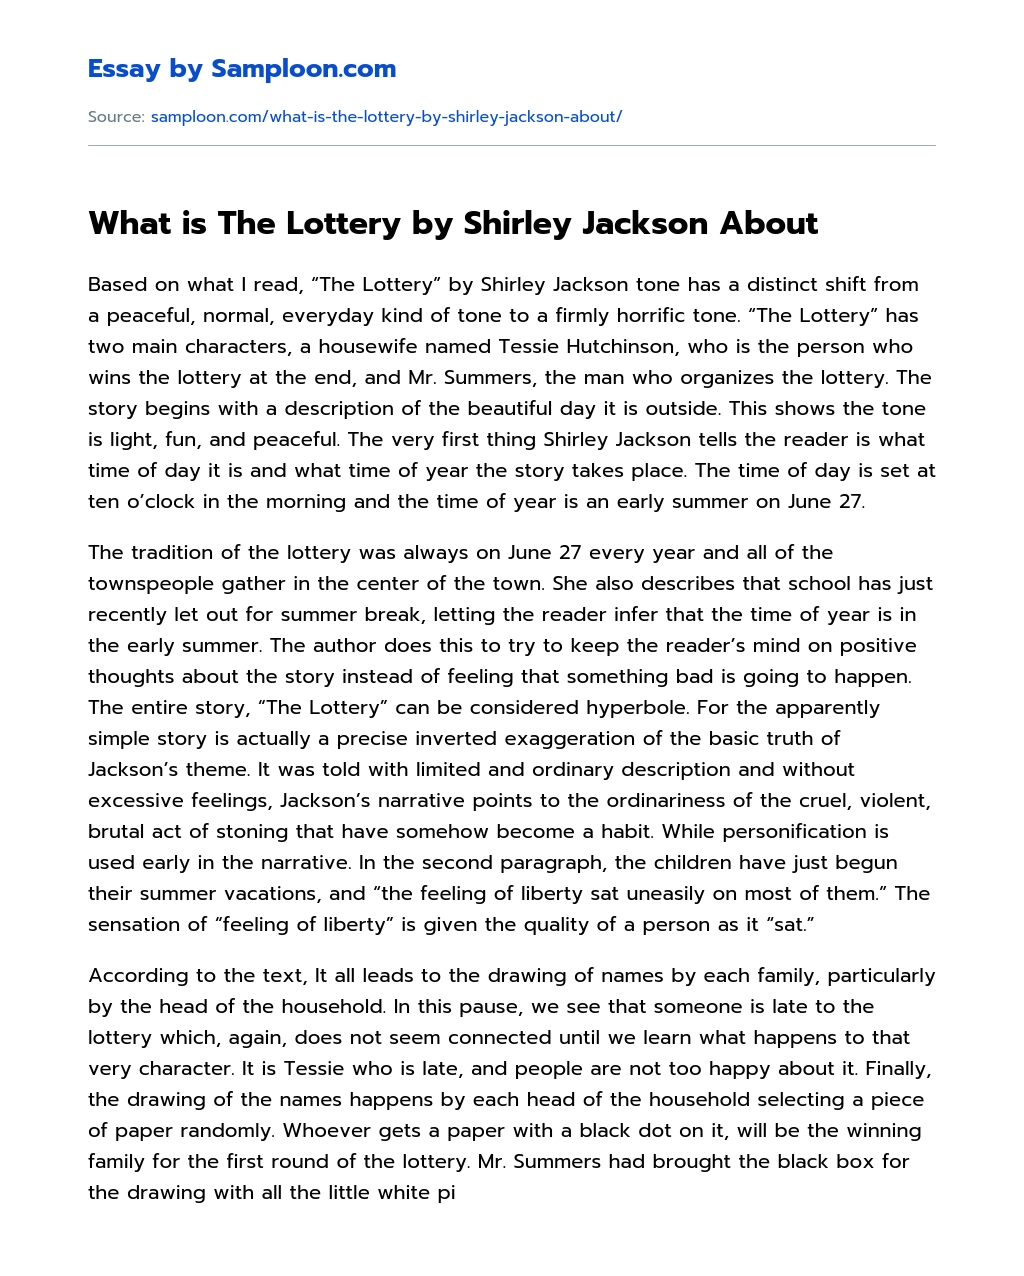 What is The Lottery by Shirley Jackson About Analytical Essay essay